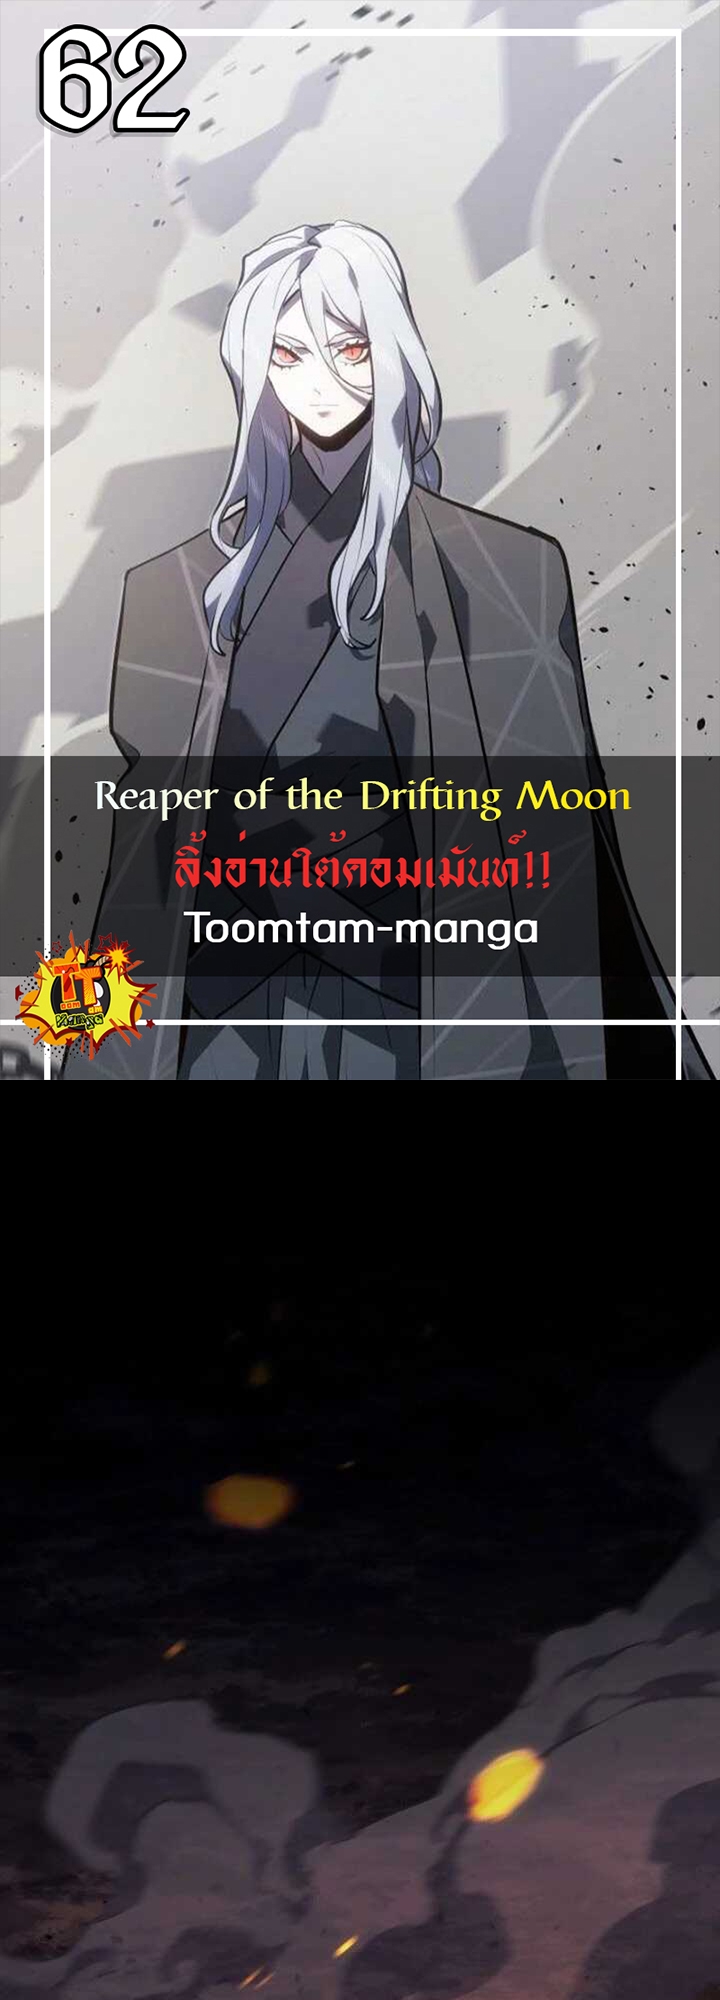 Reaper of the Drifting Moon 62 16 11 25660001